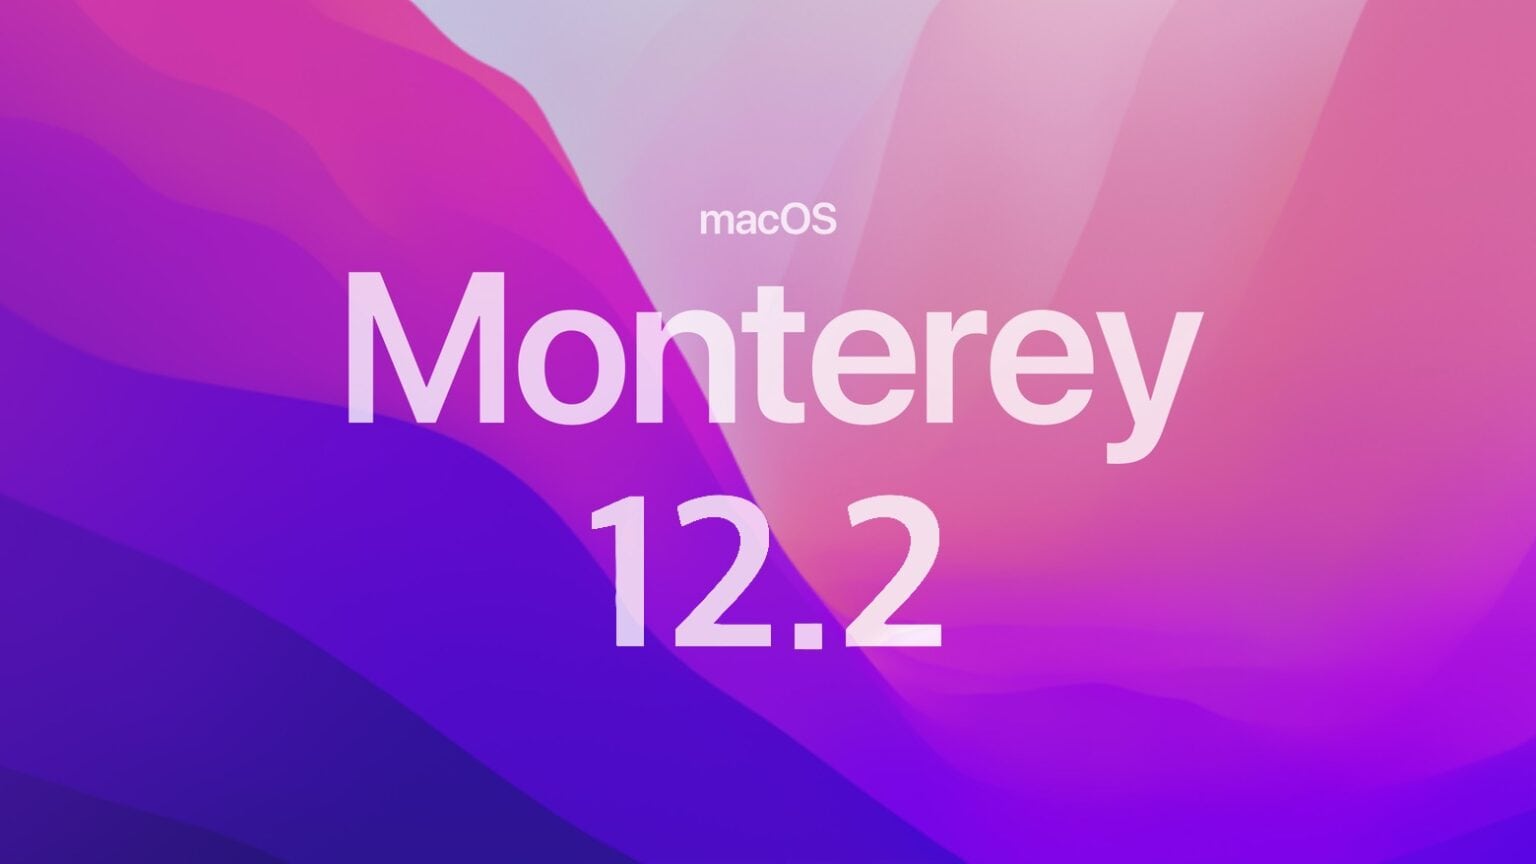 macOS Monterey 12.2 is out with smoother ProMotion scrolling… maybe